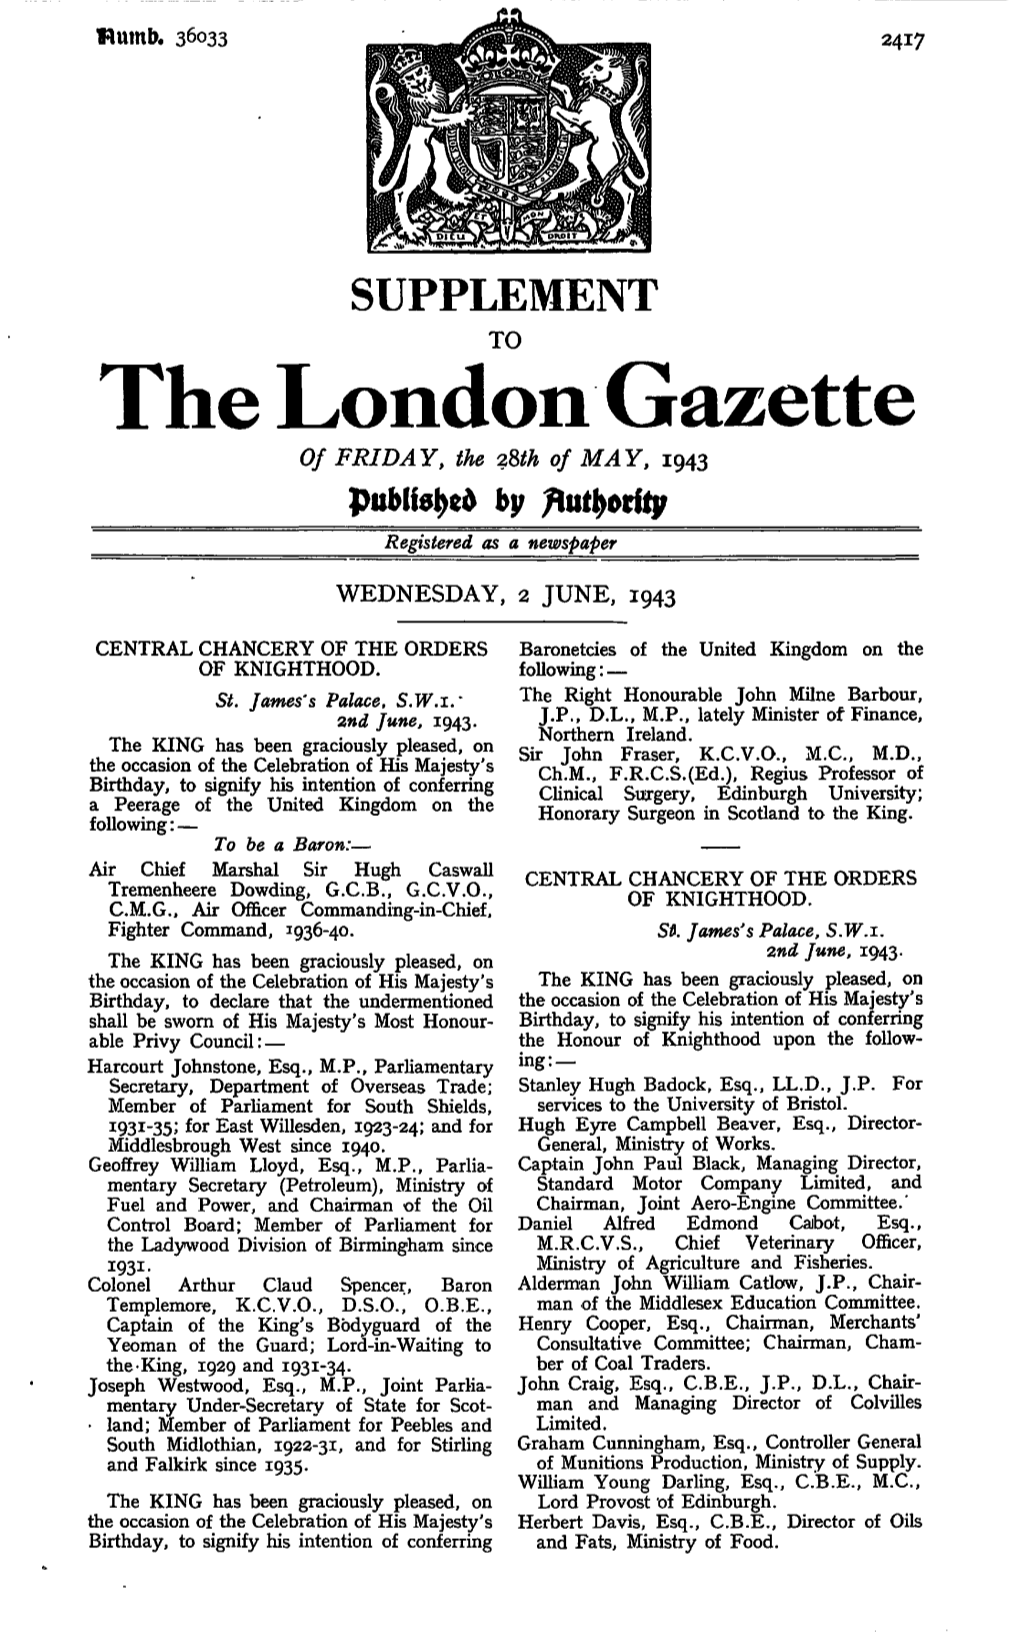 The London Gazette of FRIDAY, the 28Th of MAY, 1943 Published by Registered As a Newspaper